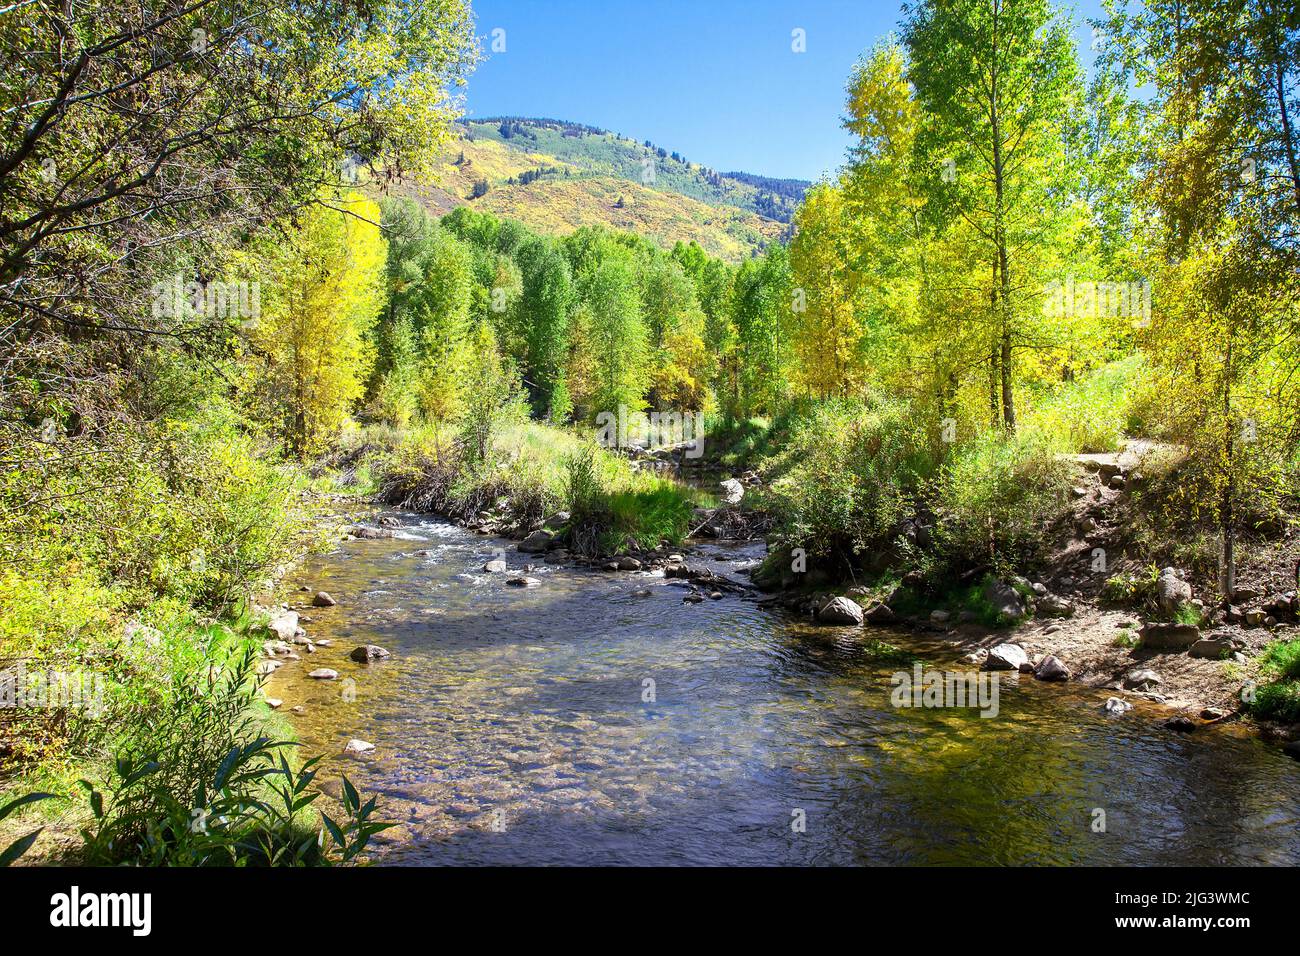 Colorful landscape, stream and mountains in rural Colorado Stock Photo